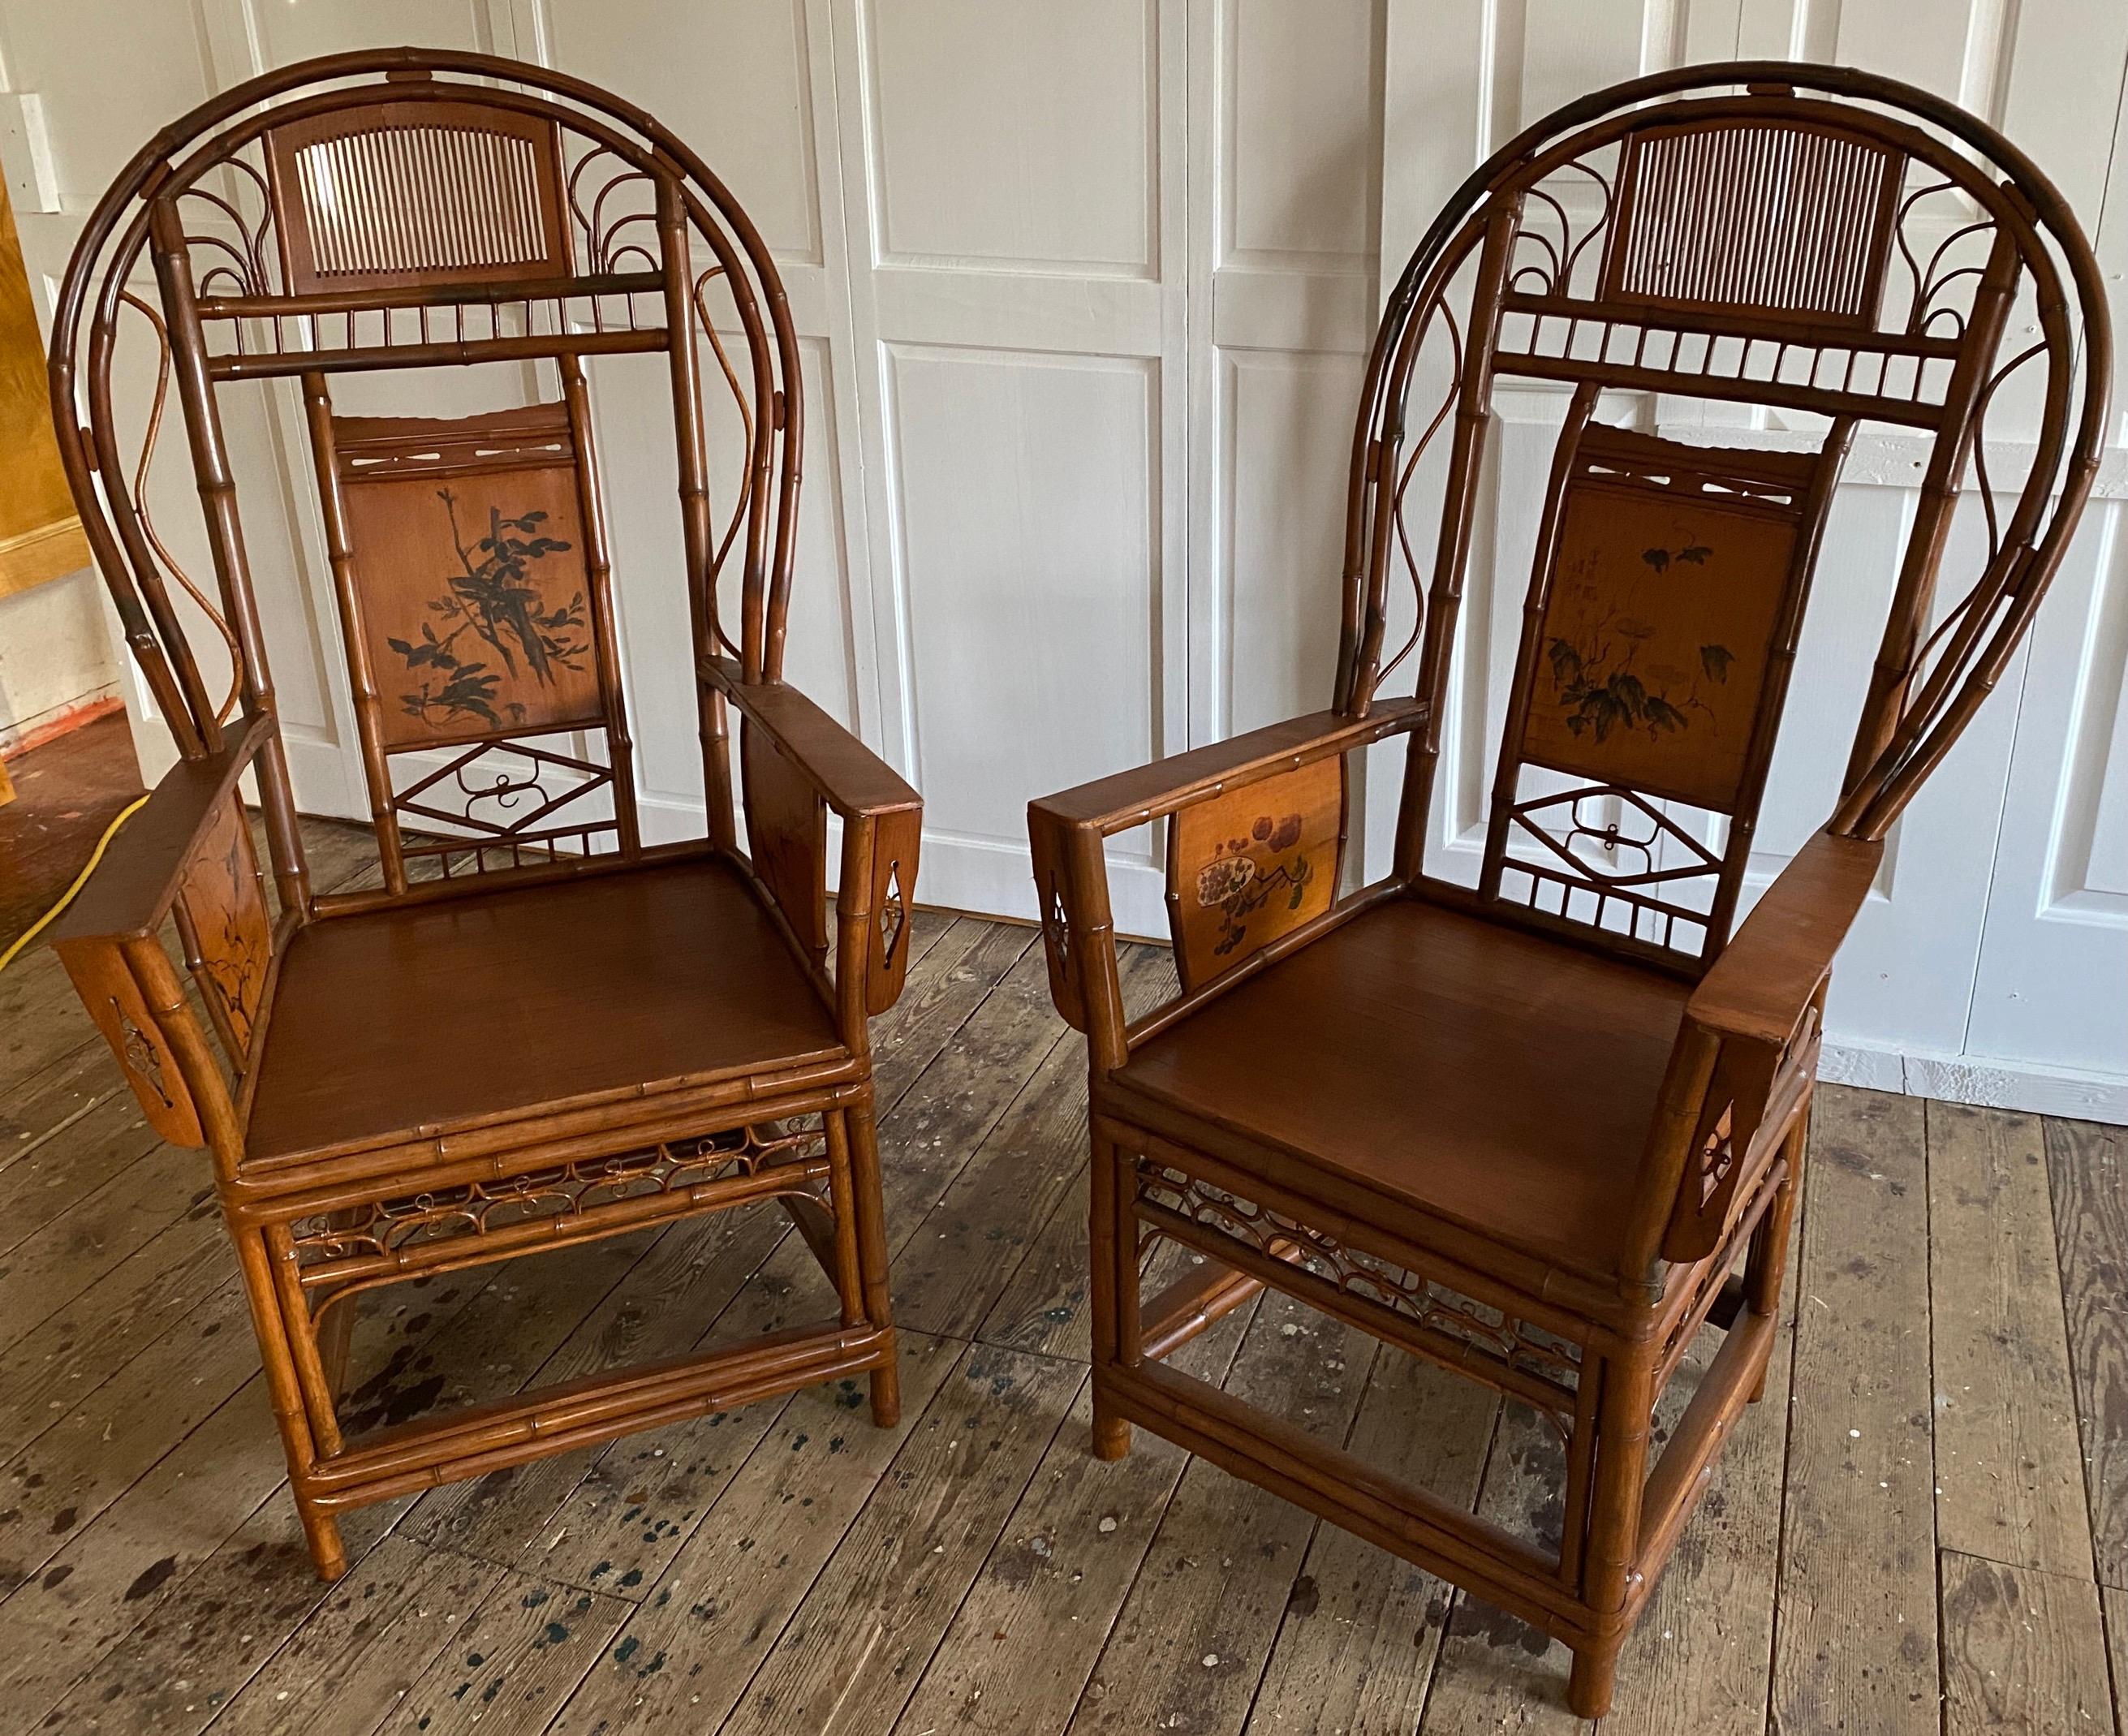 A true collector's item, a rare collection of early 20th Century 'Brighton Pavilion' Bamboo Chinoiserie armchairs displaying long flat arms in a horseshoe shape back, supported by geometric designs in a Chinese Chippendale style. Raised on four legs